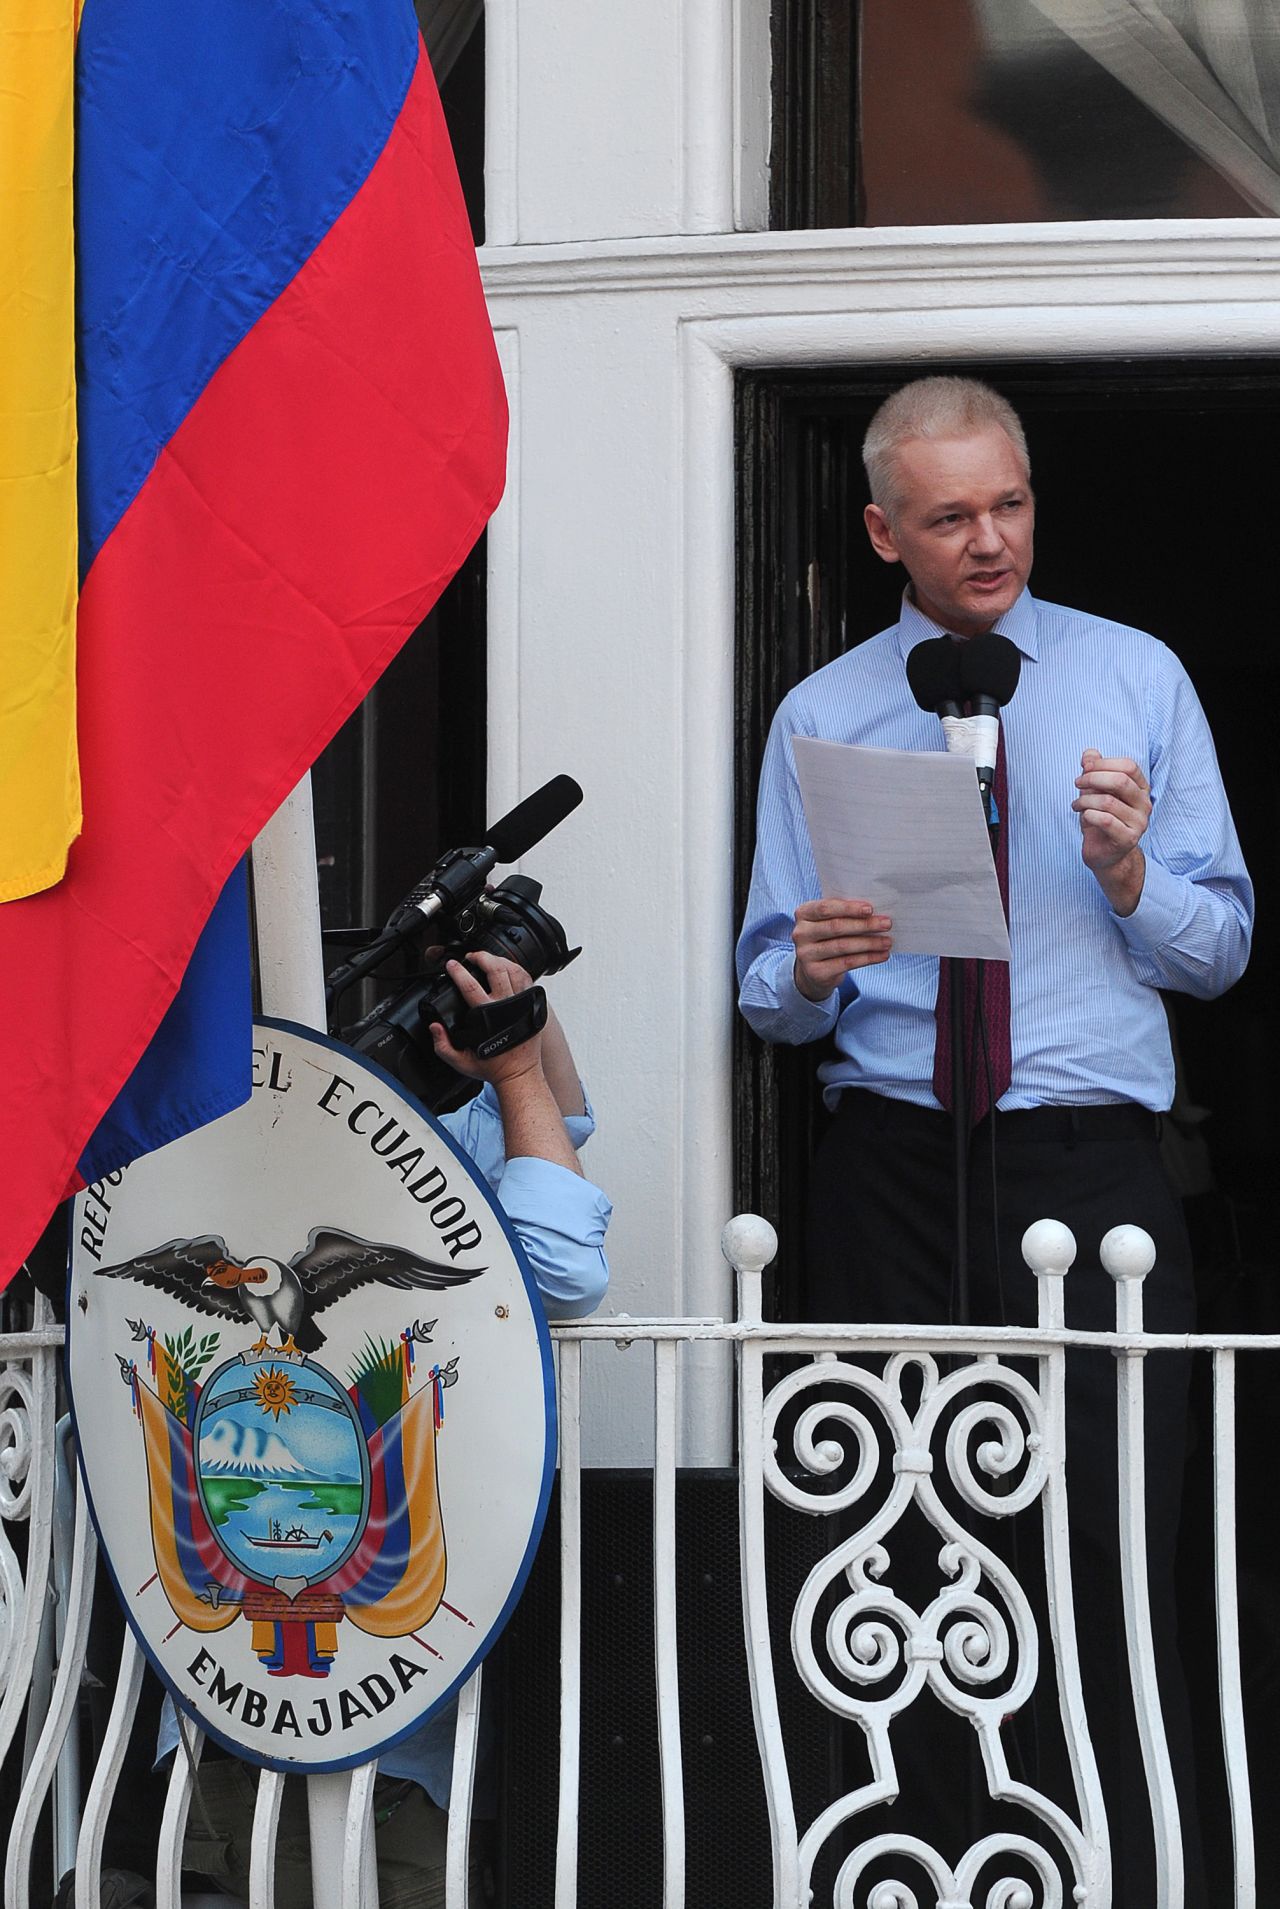 Assange addresses the media and his supporters from the balcony of the Ecuadorian Embassy in London on Sunday, August 19.